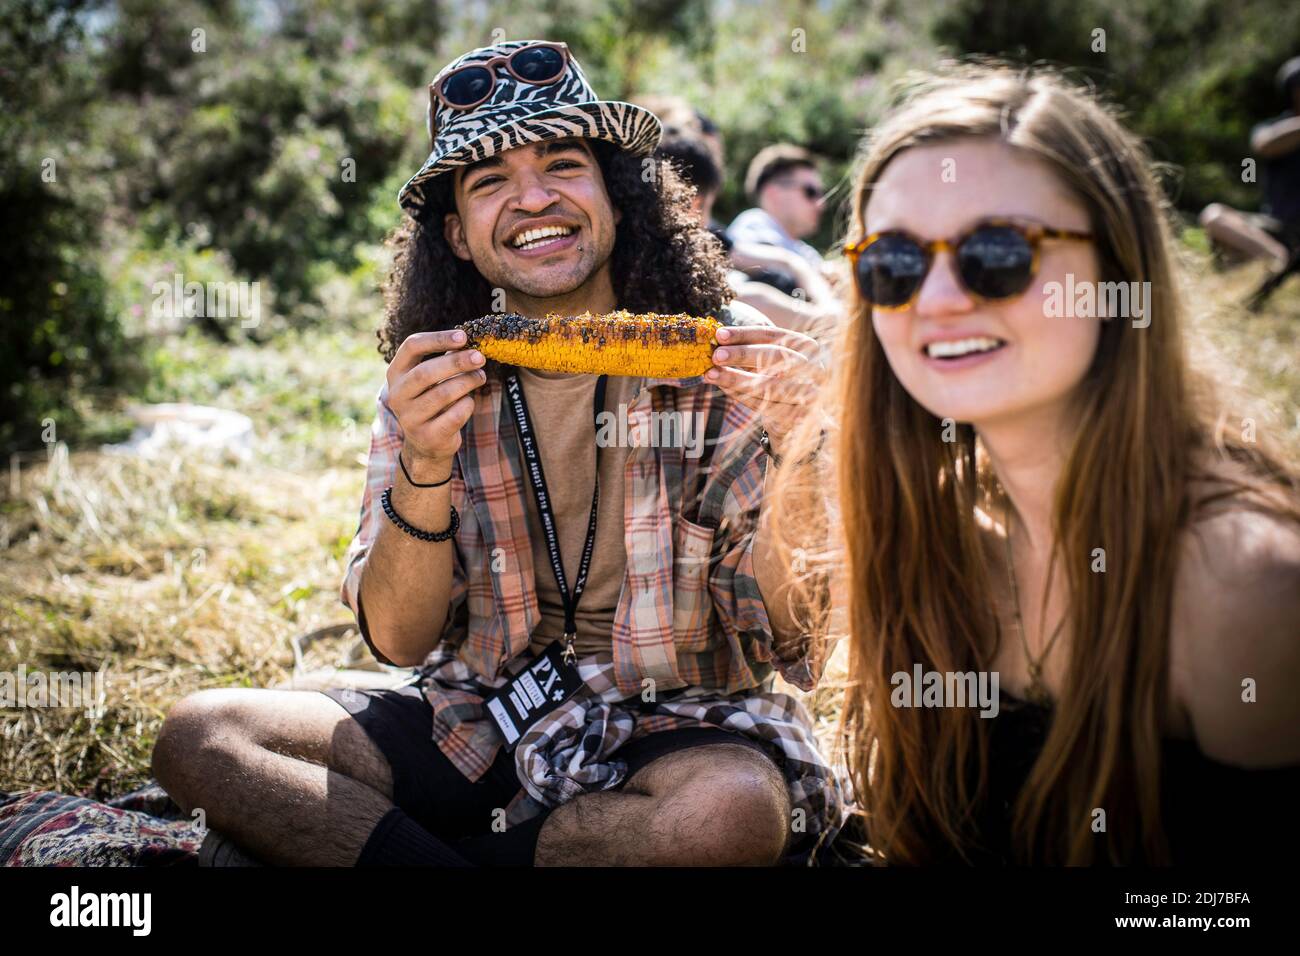 GREAT BRITAIN / England / Hertfordshire /Happy man with friend eating corn on the cob at food festival in England. Stock Photo